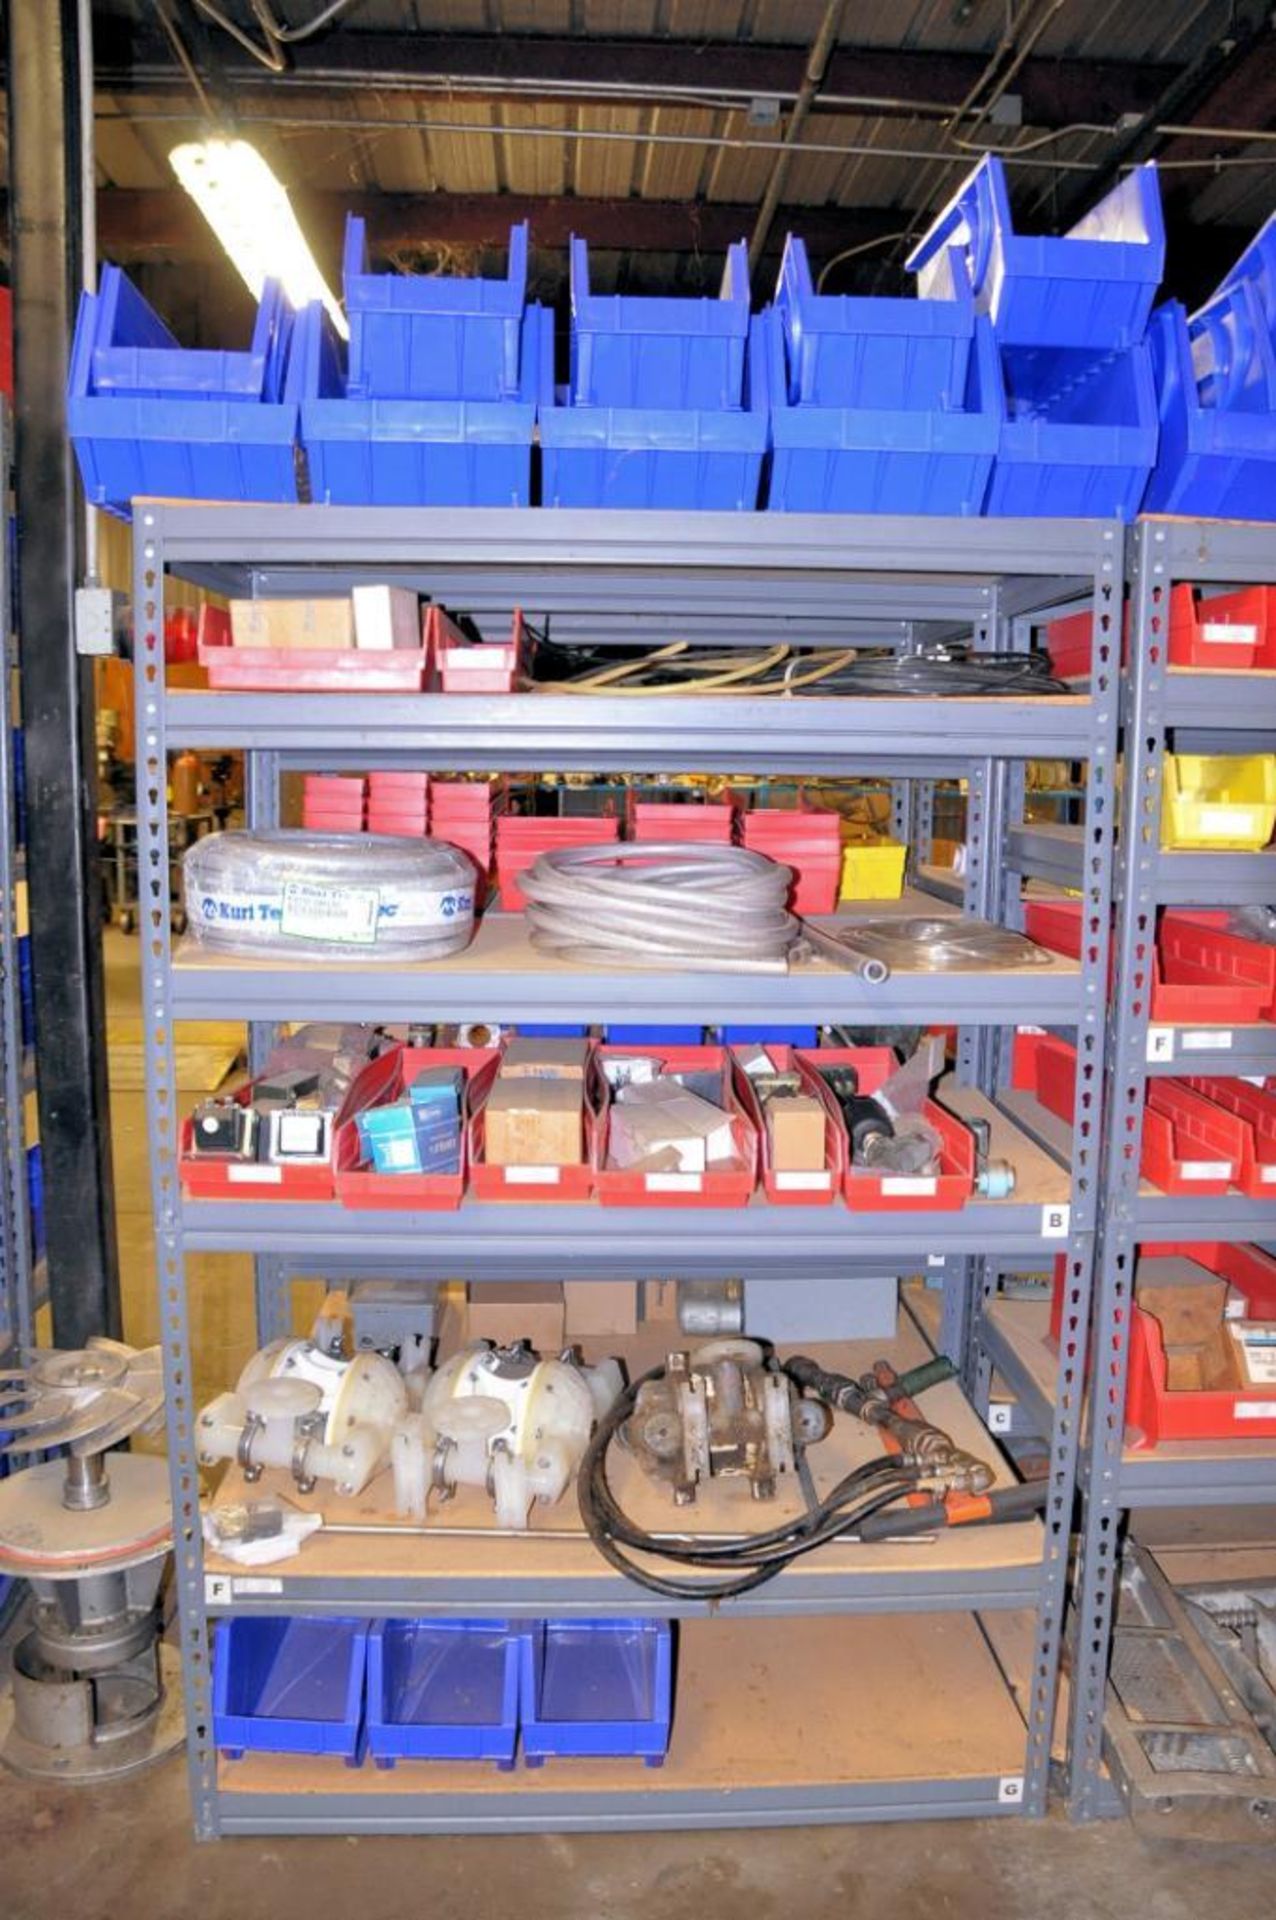 Lot - (8) Sections of Shelving with Diaphragm Pumps, Valves, Electronic Machine Parts, Pipe Fittings - Image 4 of 7